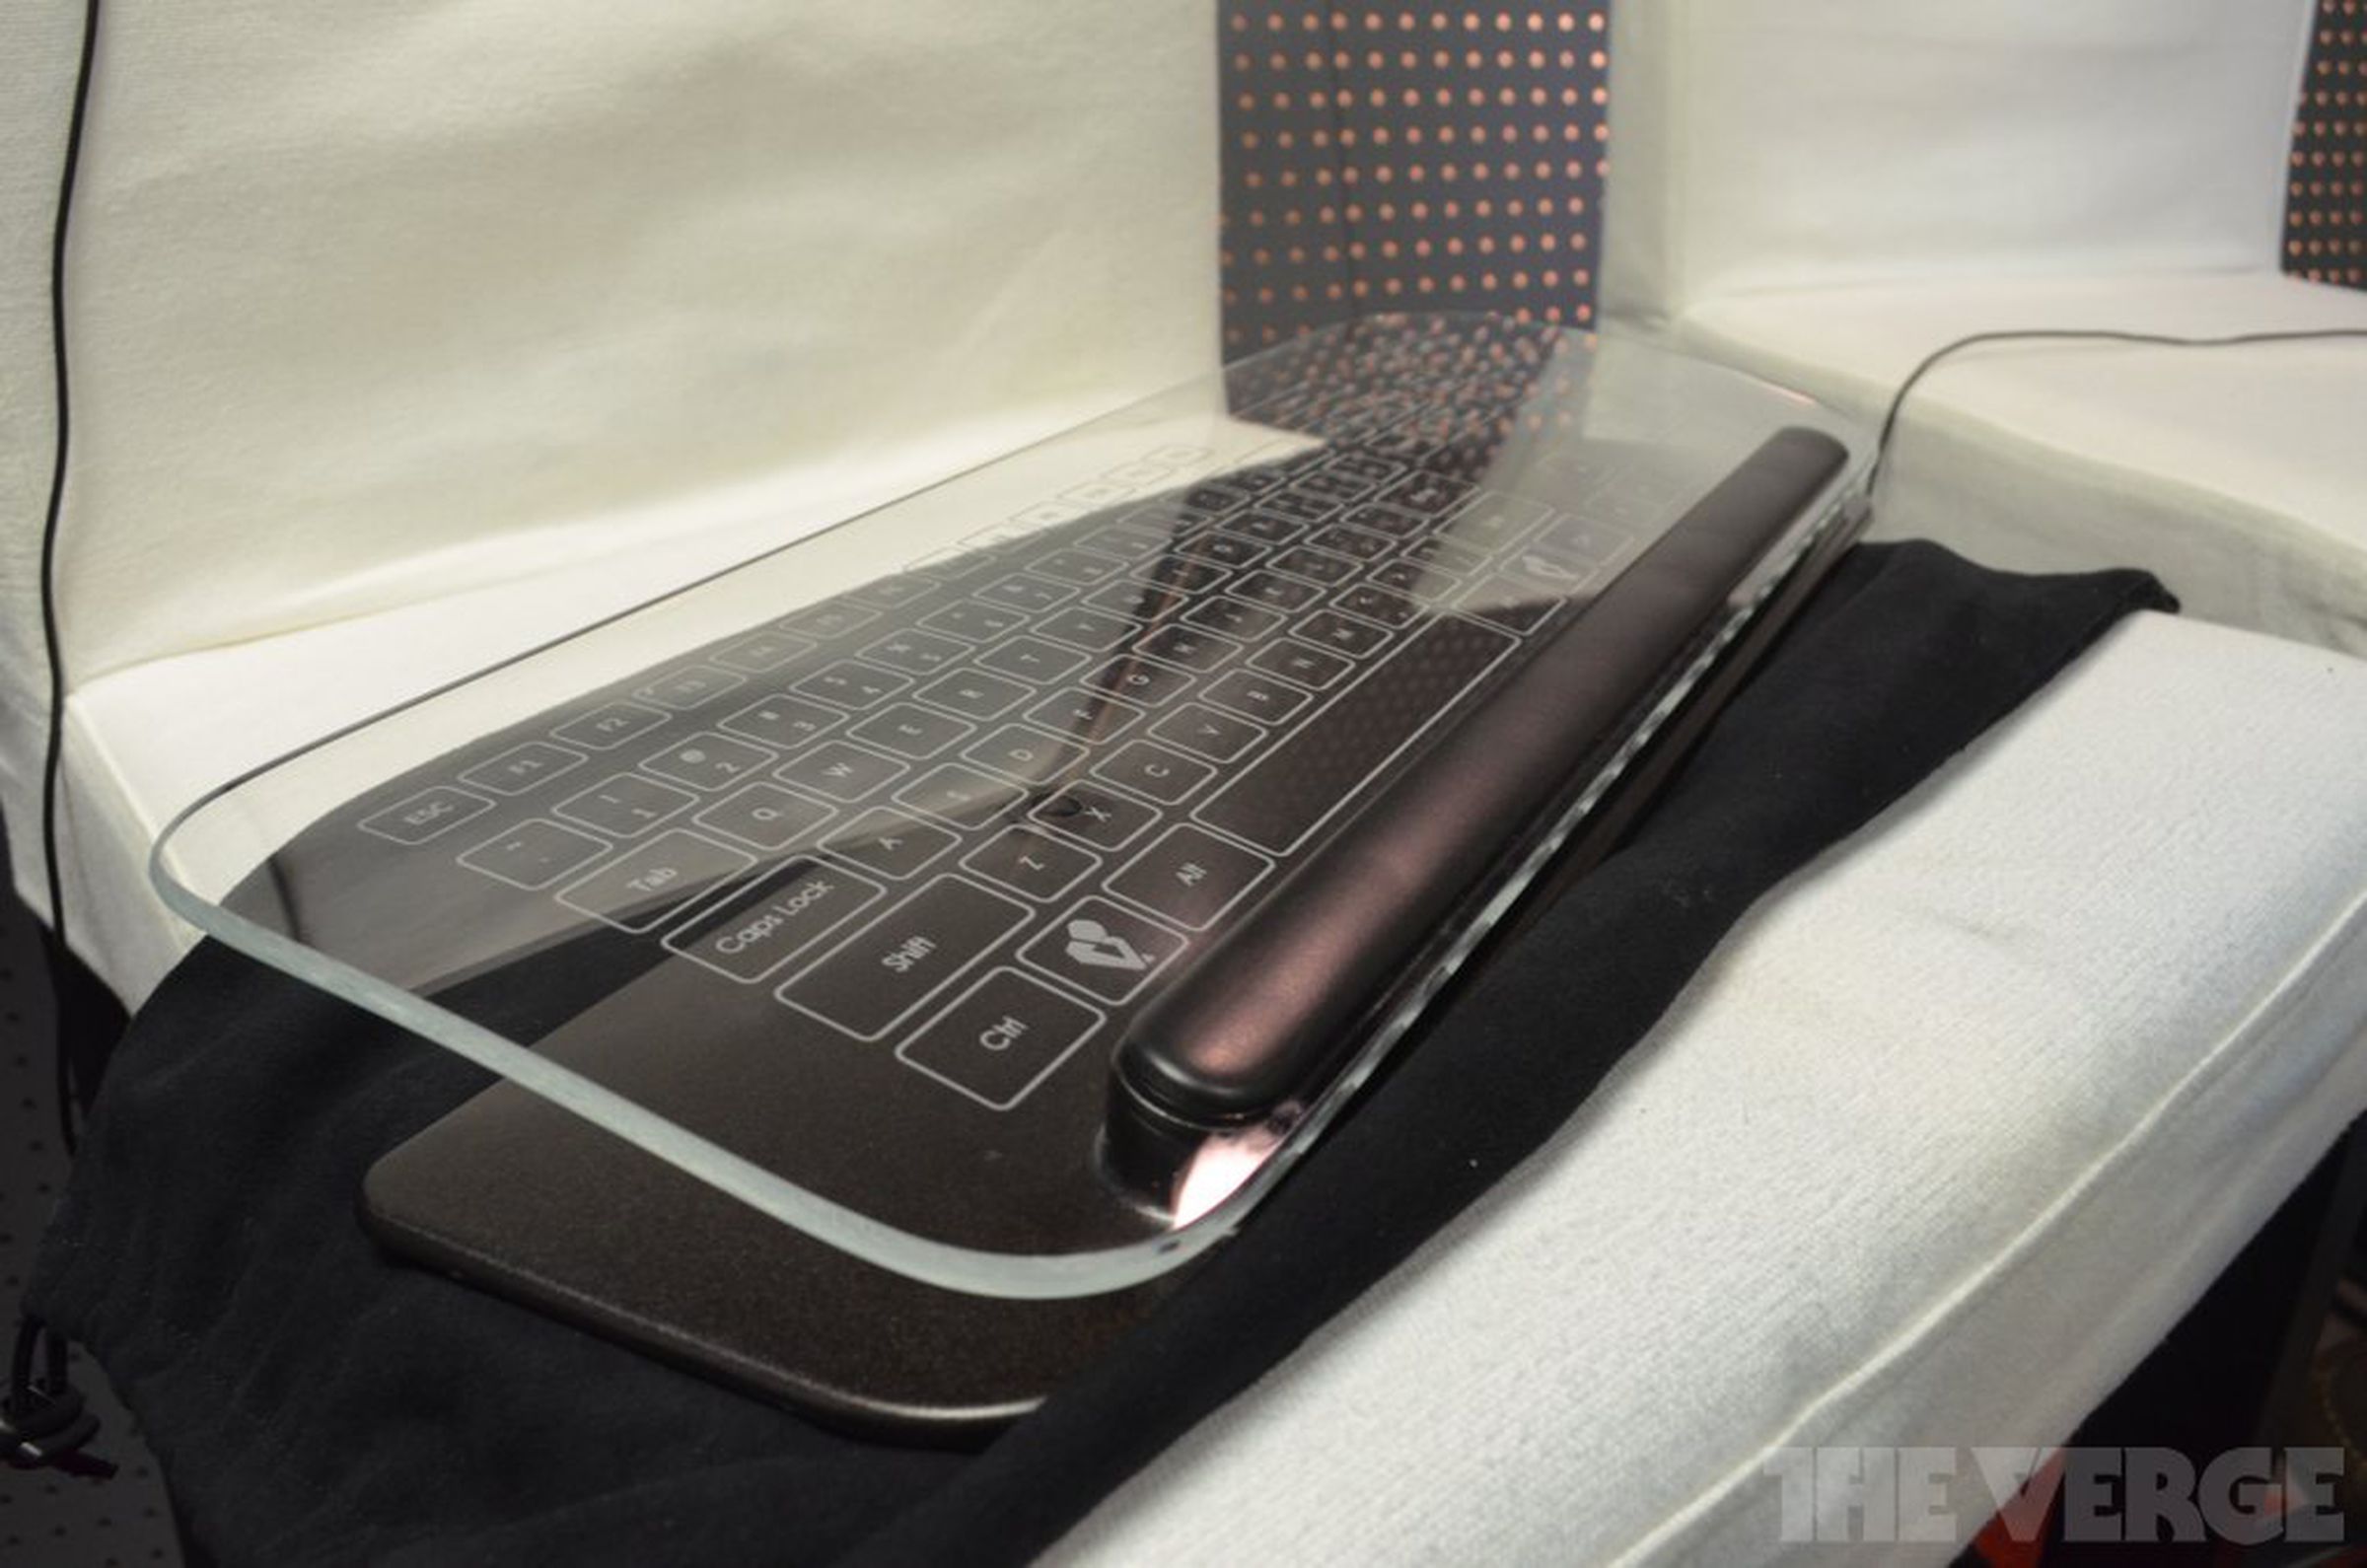 Glass Multitouch Keyboard hands-on pictures